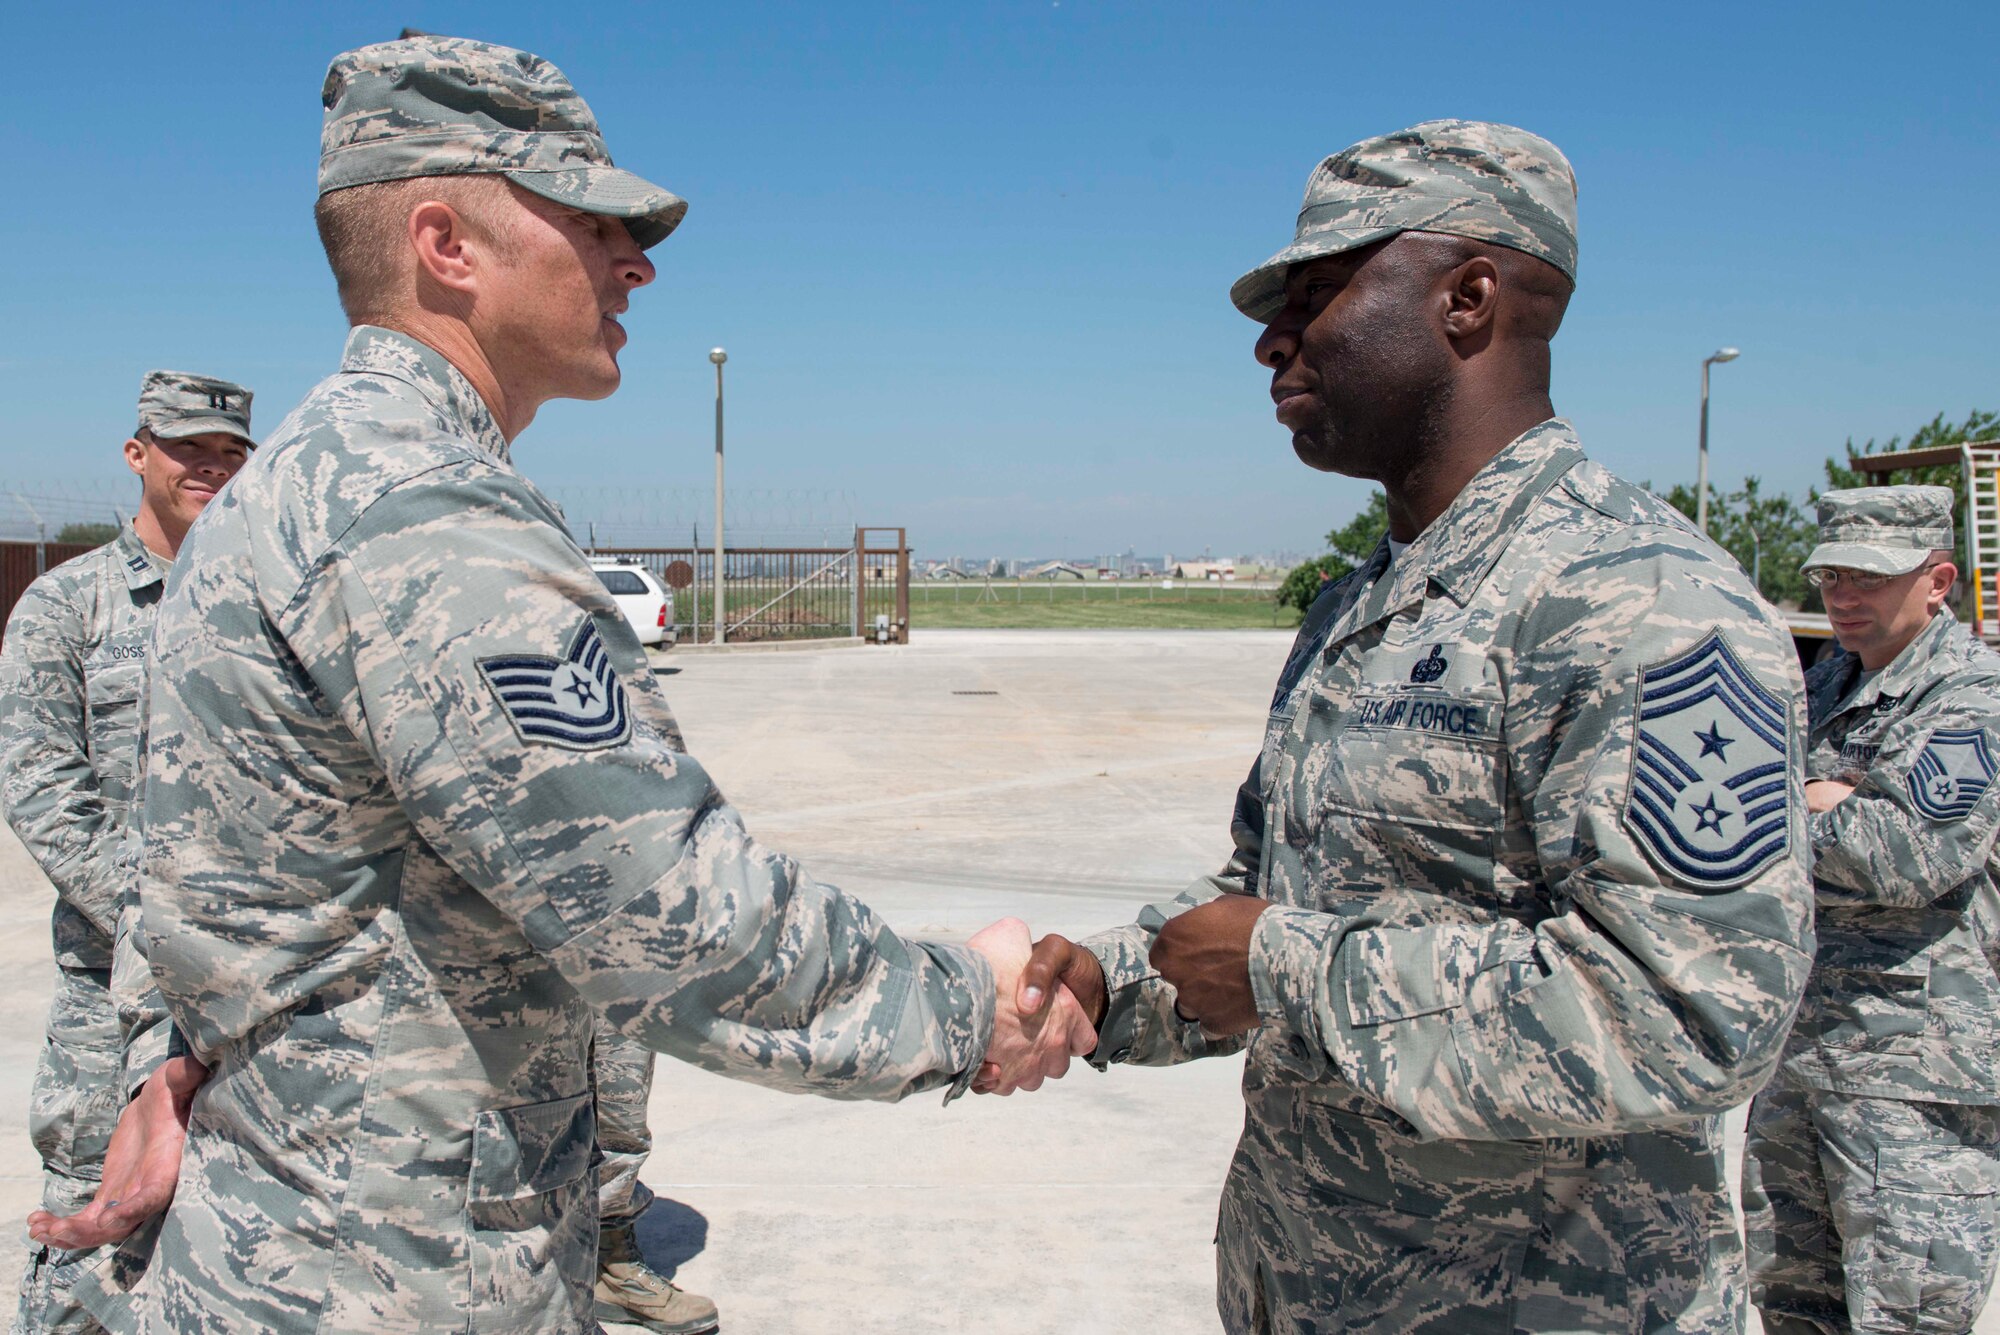 U.S. Air Force Chief Master Sgt. Vegas Clark, 39th Air Base Wing command chief, coins U.S. Air Force Tech. Sgt. Travis Hoff, 39th Civil Engineer Squadron heavy repair section chief, April 25, 2016, at Incirlik Air Base, Turkey. Clark recognized Hoff for his performance while serving as a fitness assessment cell augmentee. Hoff responded to a collapsed runner during the Air Force physical fitness test and provided first-response actions, ensuring the well-being of the member. (U.S. Air Force photo by Senior Airman John Nieves Camacho/Released)